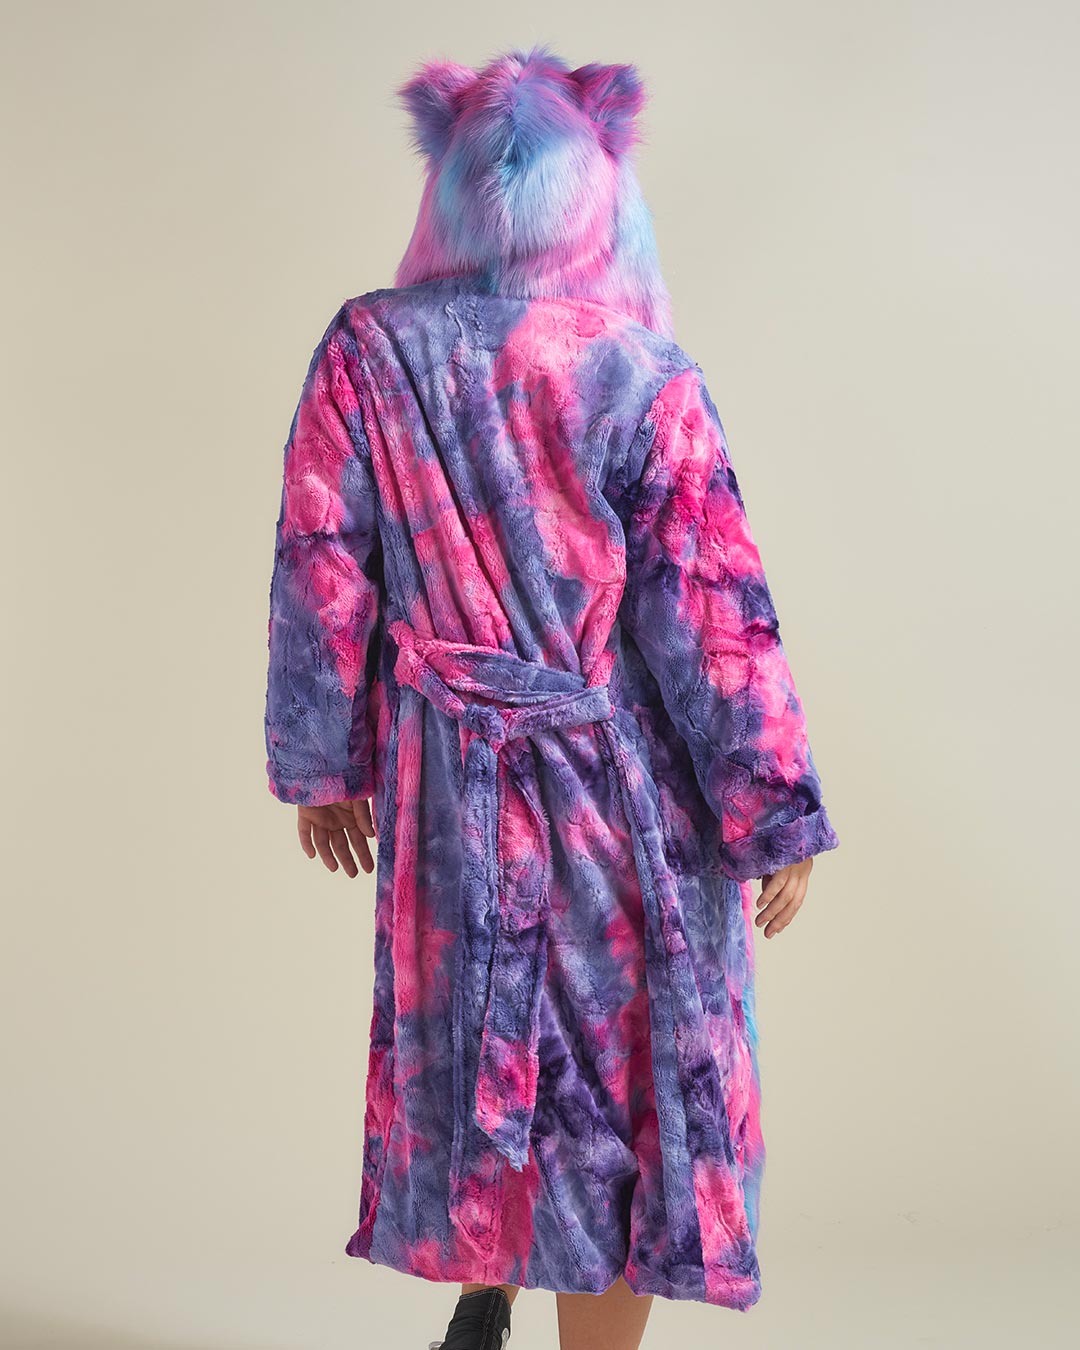 Back View of Woman wearing Cotton Candy Kitty Classic Faux Fur Style Robe